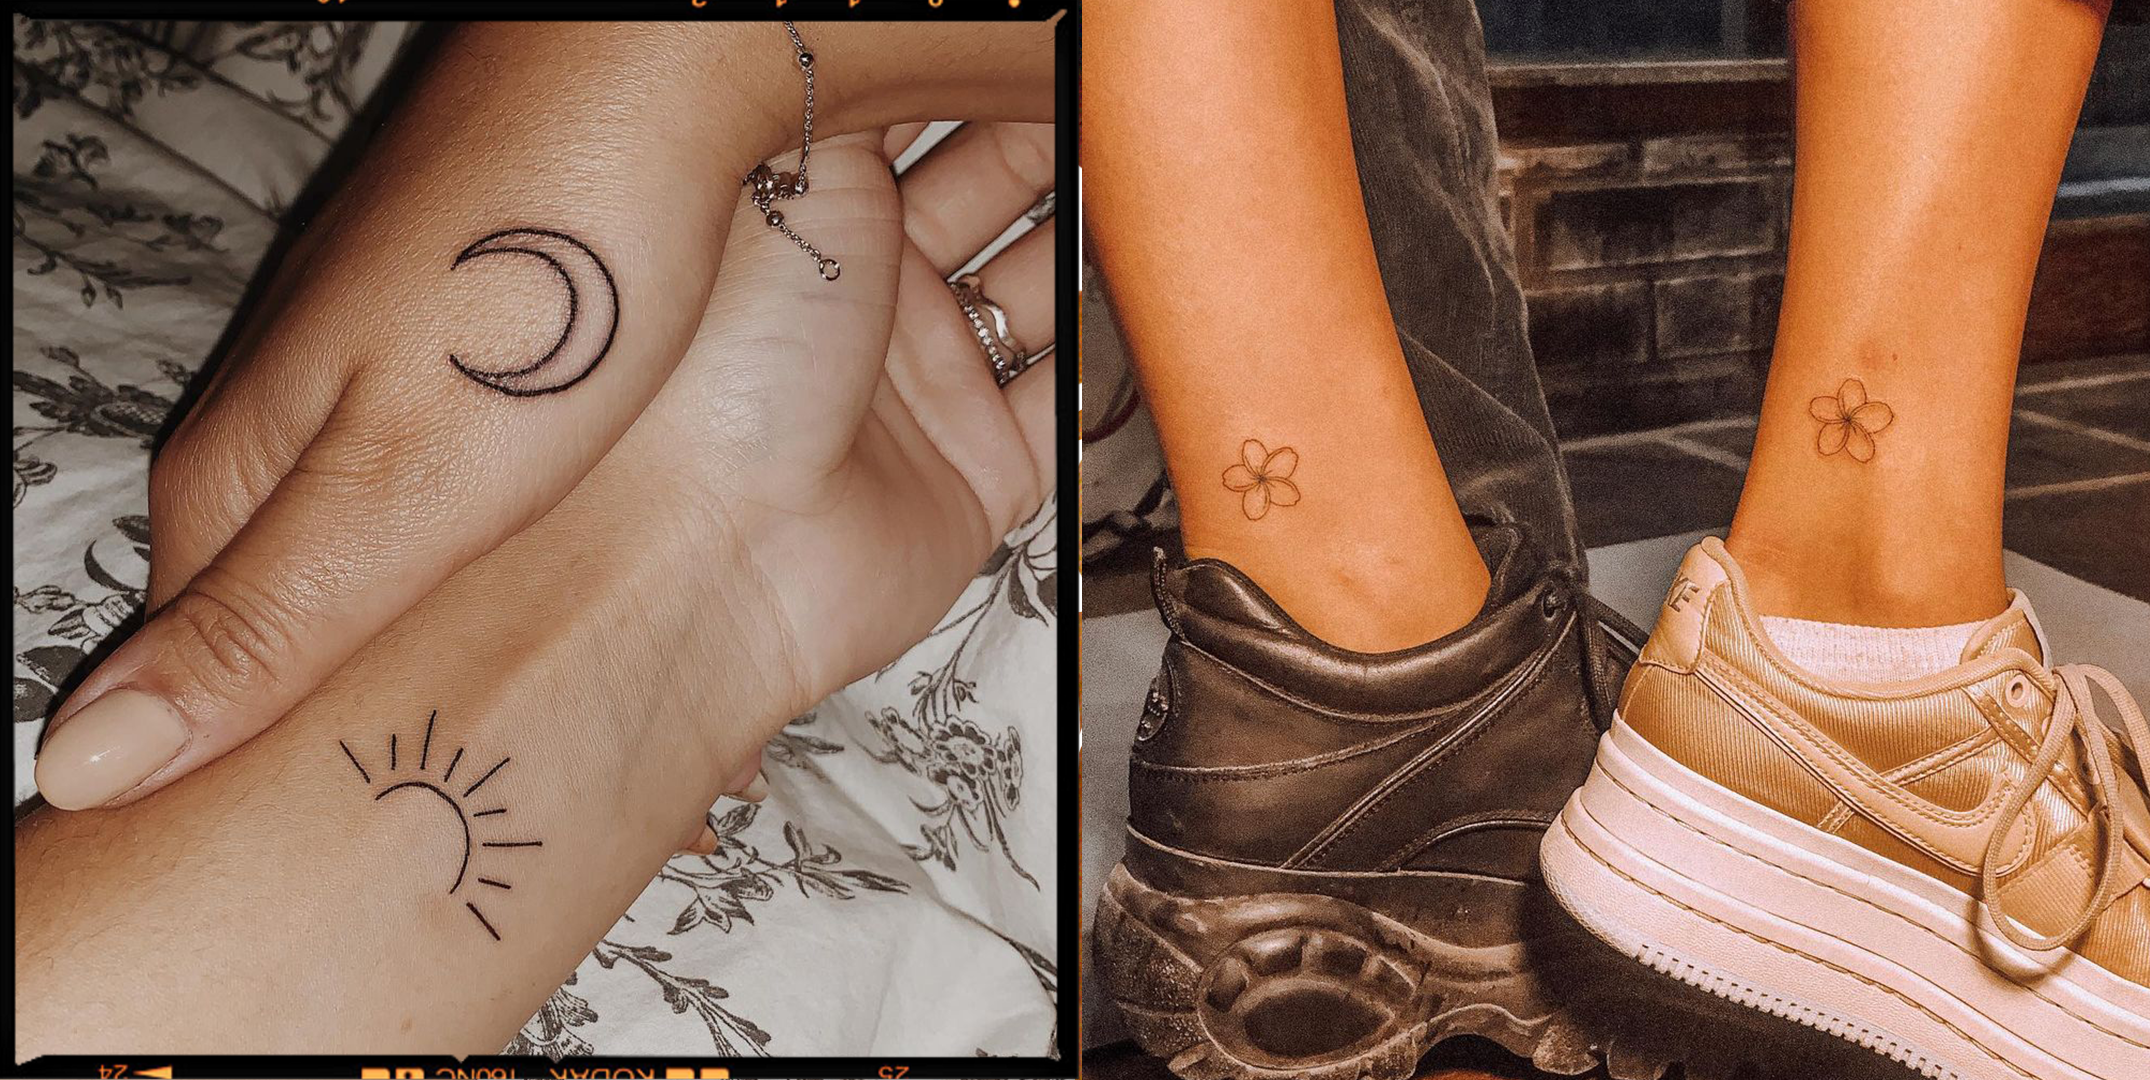 31 Cute Tiny Tattoos Ideas For Girls | Matching tattoos, Friend tattoos  small, Friend tattoos